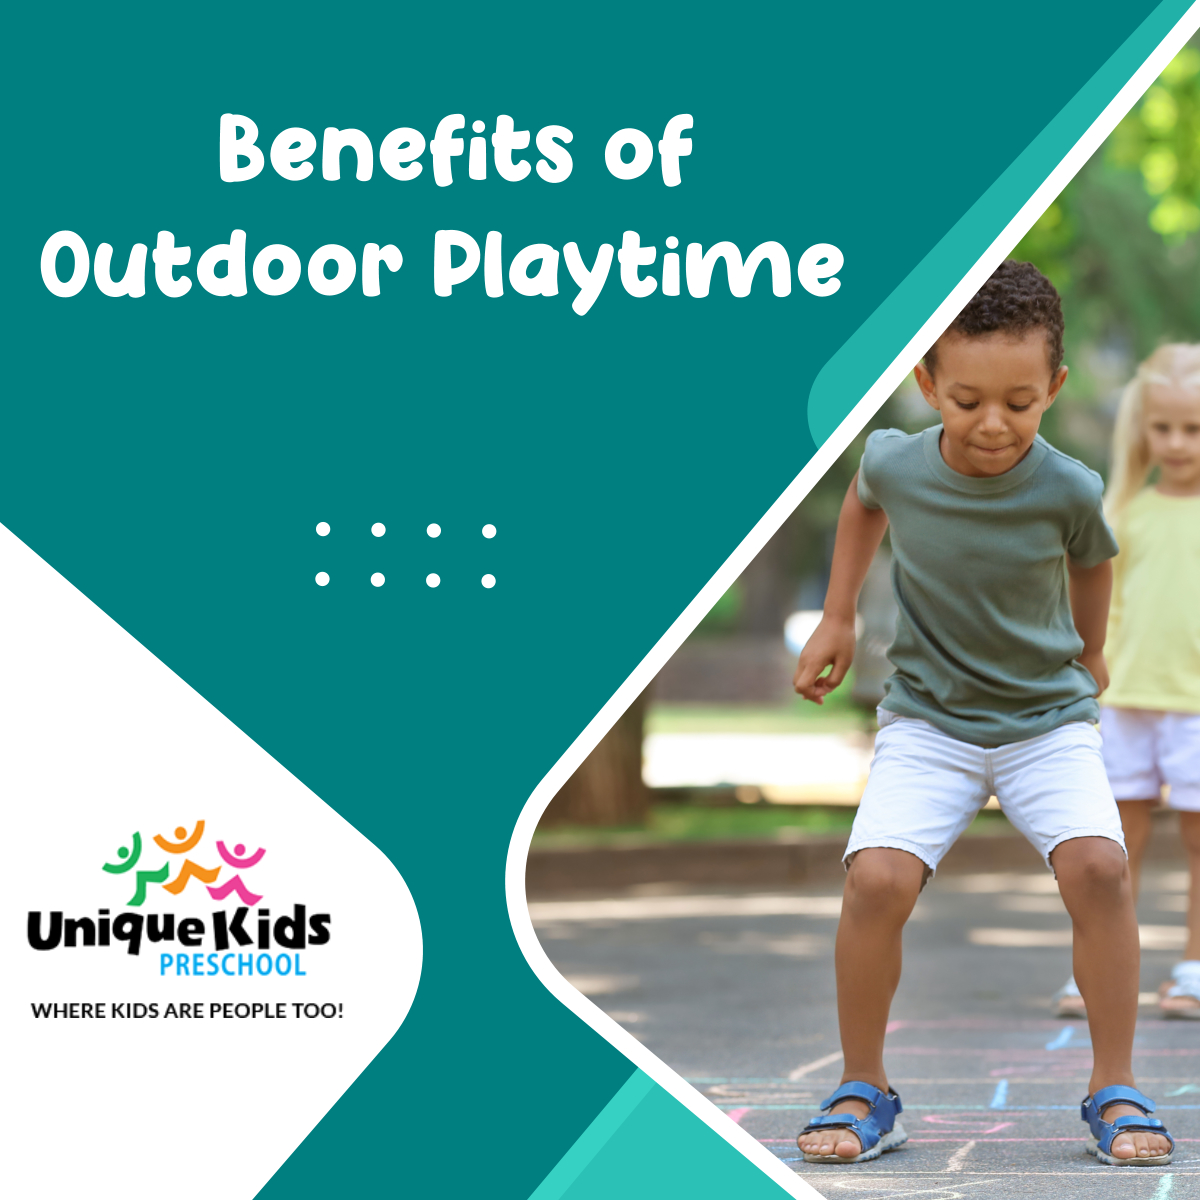 Playing outdoors allows kids to explore their surroundings, develop their physical skills and health, gain self-confidence, and learn socialization. Playing outdoors is an activity that makes wonderful childhood memories.

#OutdoorPlaytime #ChildCare #MiamiGardensFL #Preschool